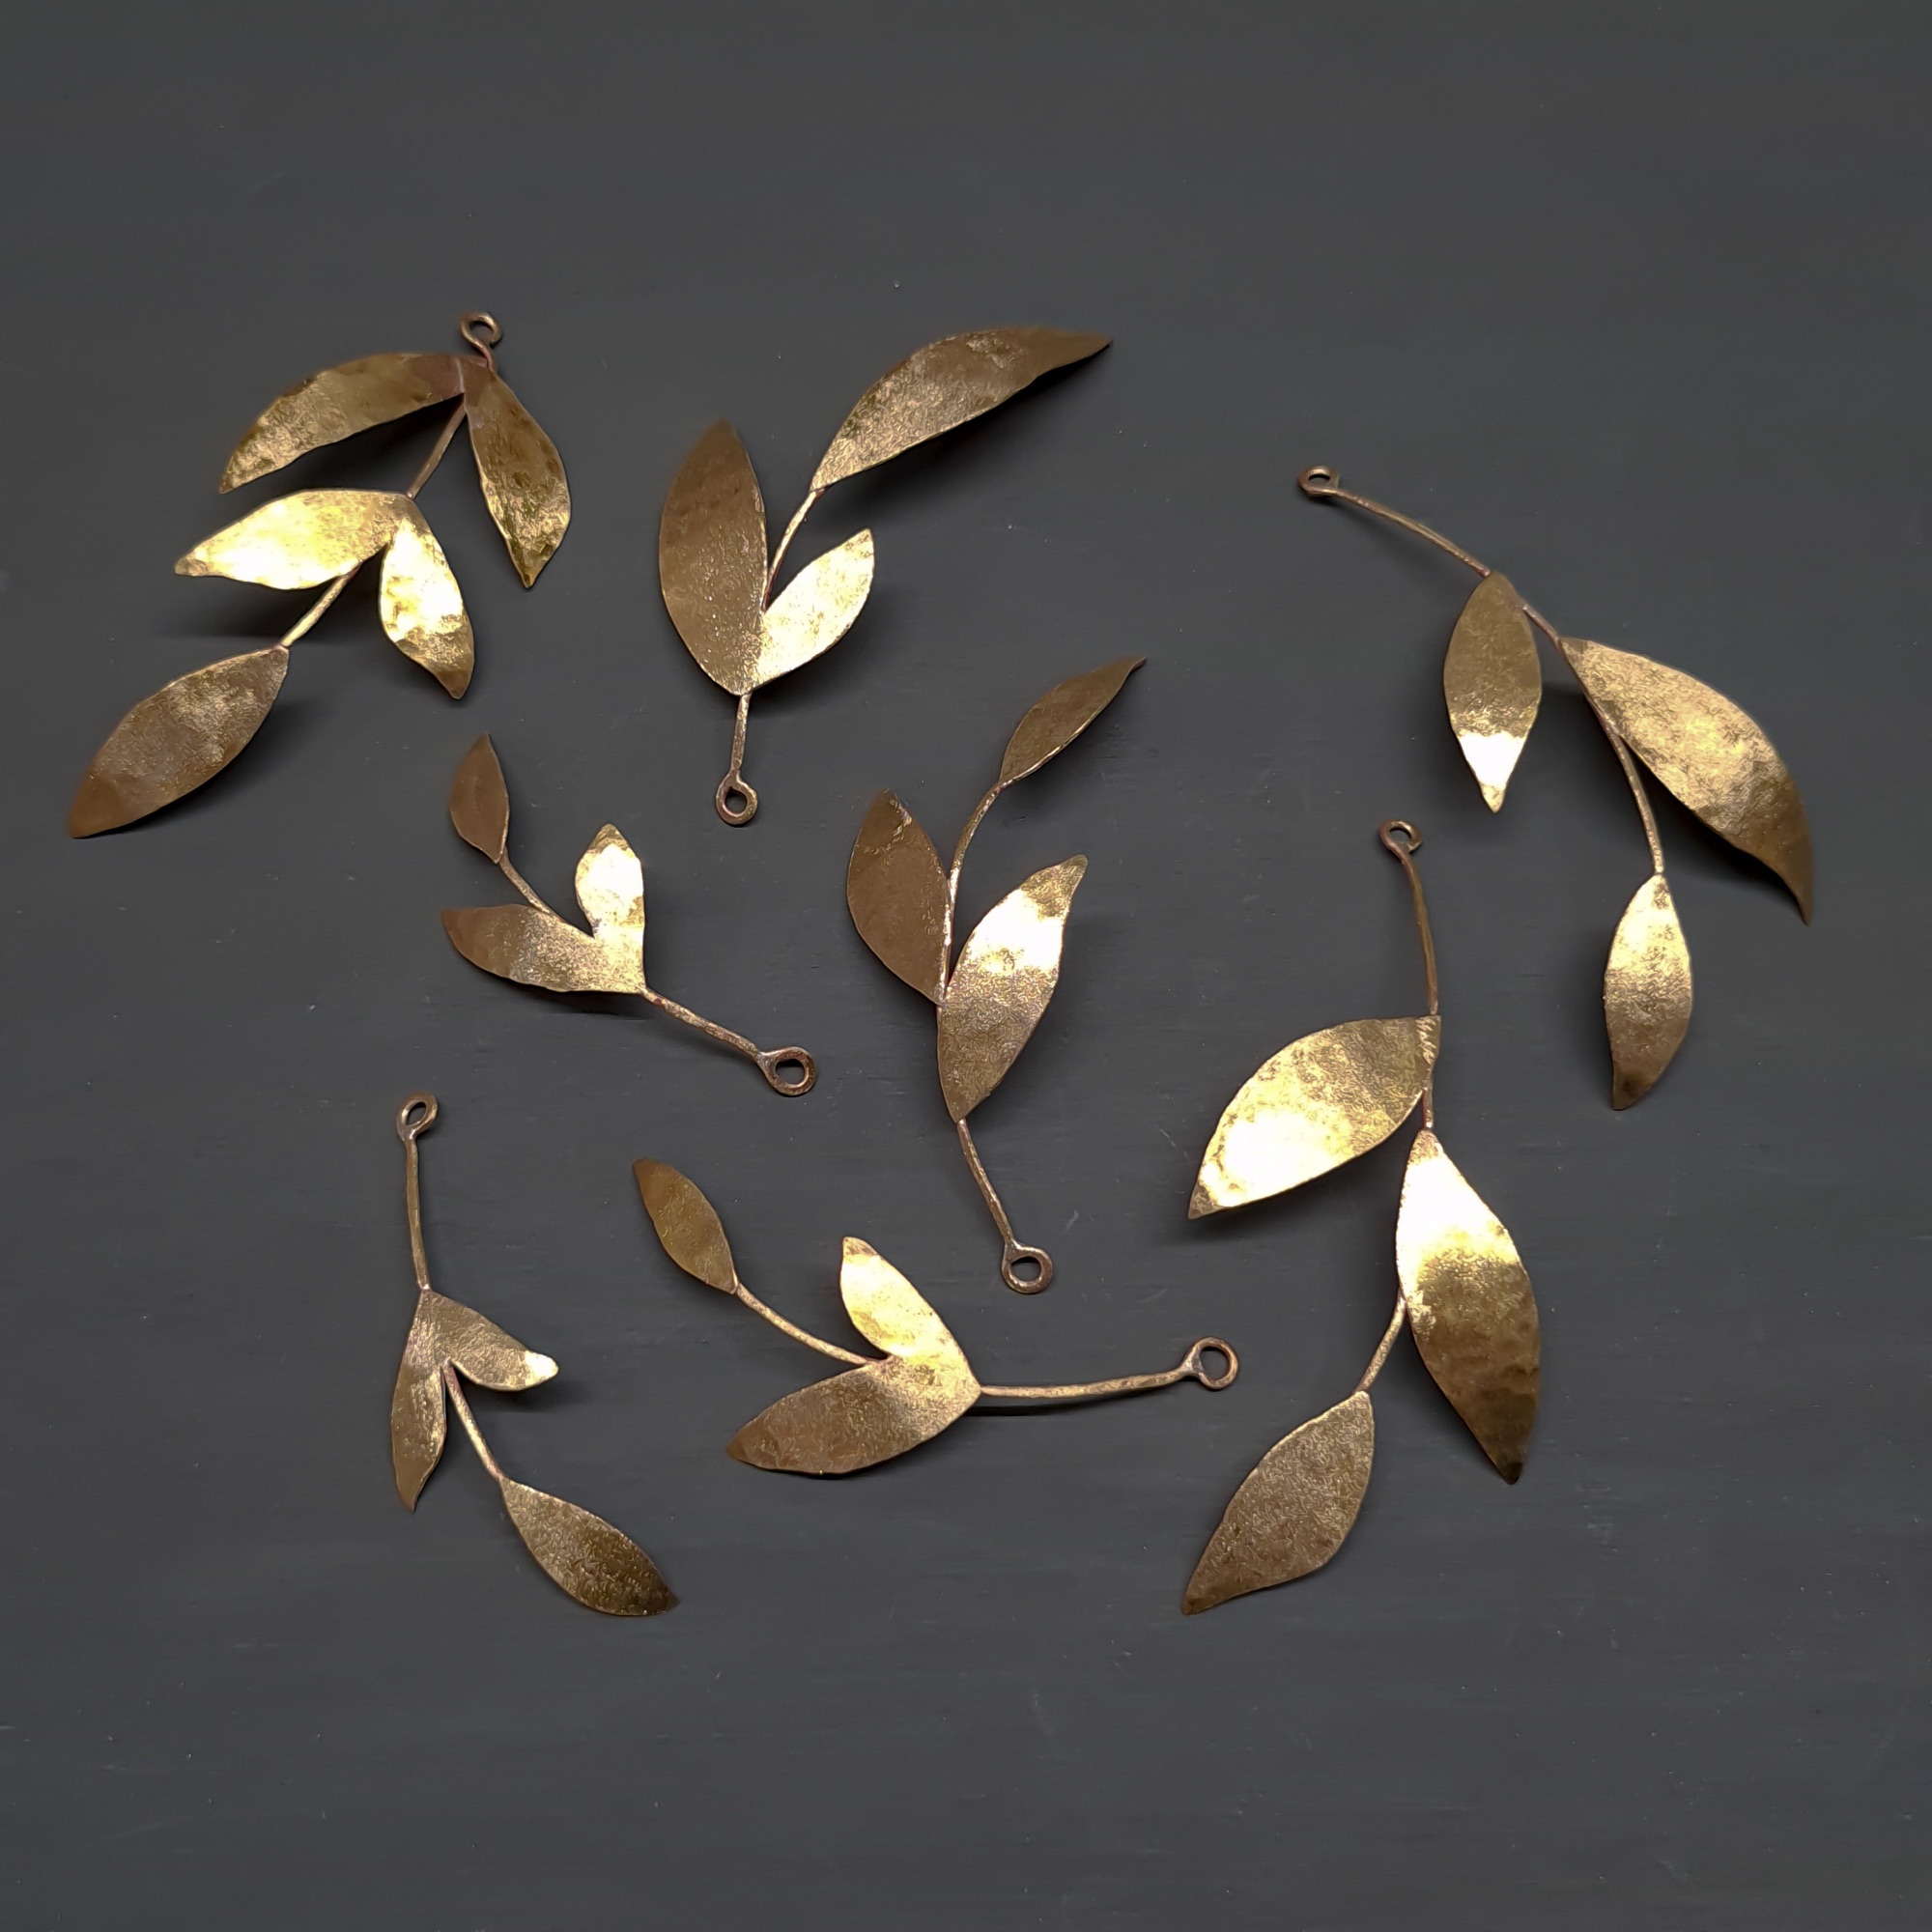 Leaf shaped bridal headpieces made from recycled brass by Clare Lloyd